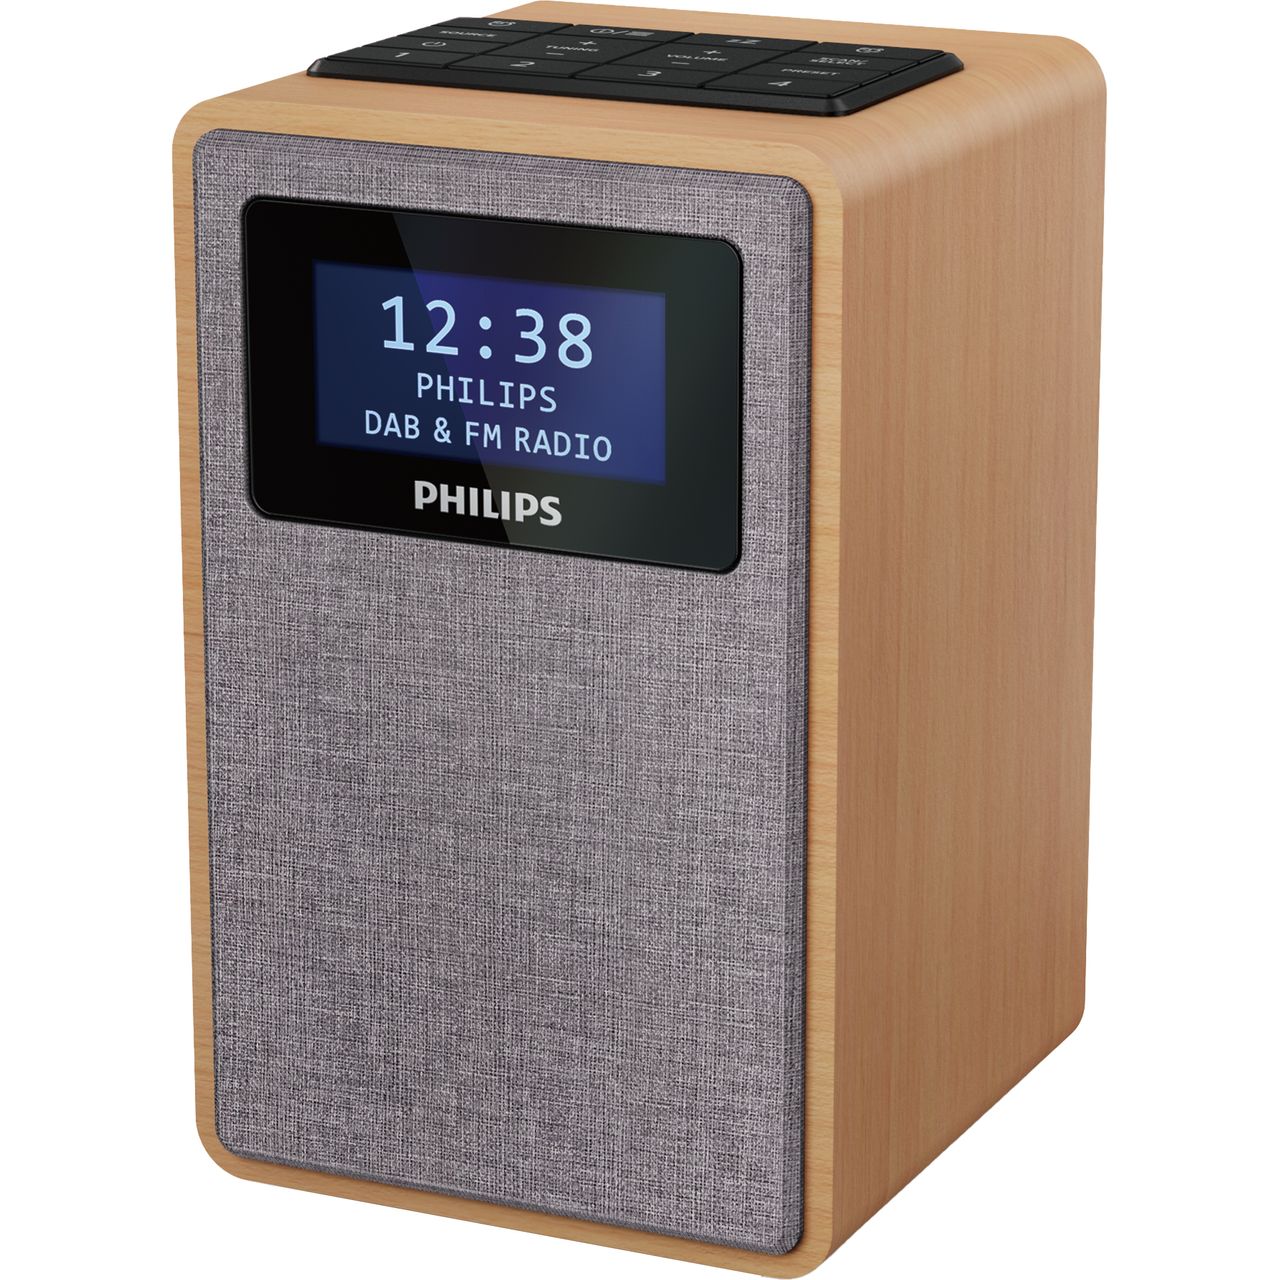 Philips TAR5005 DAB+ Digital Radio with FM Tuner Review